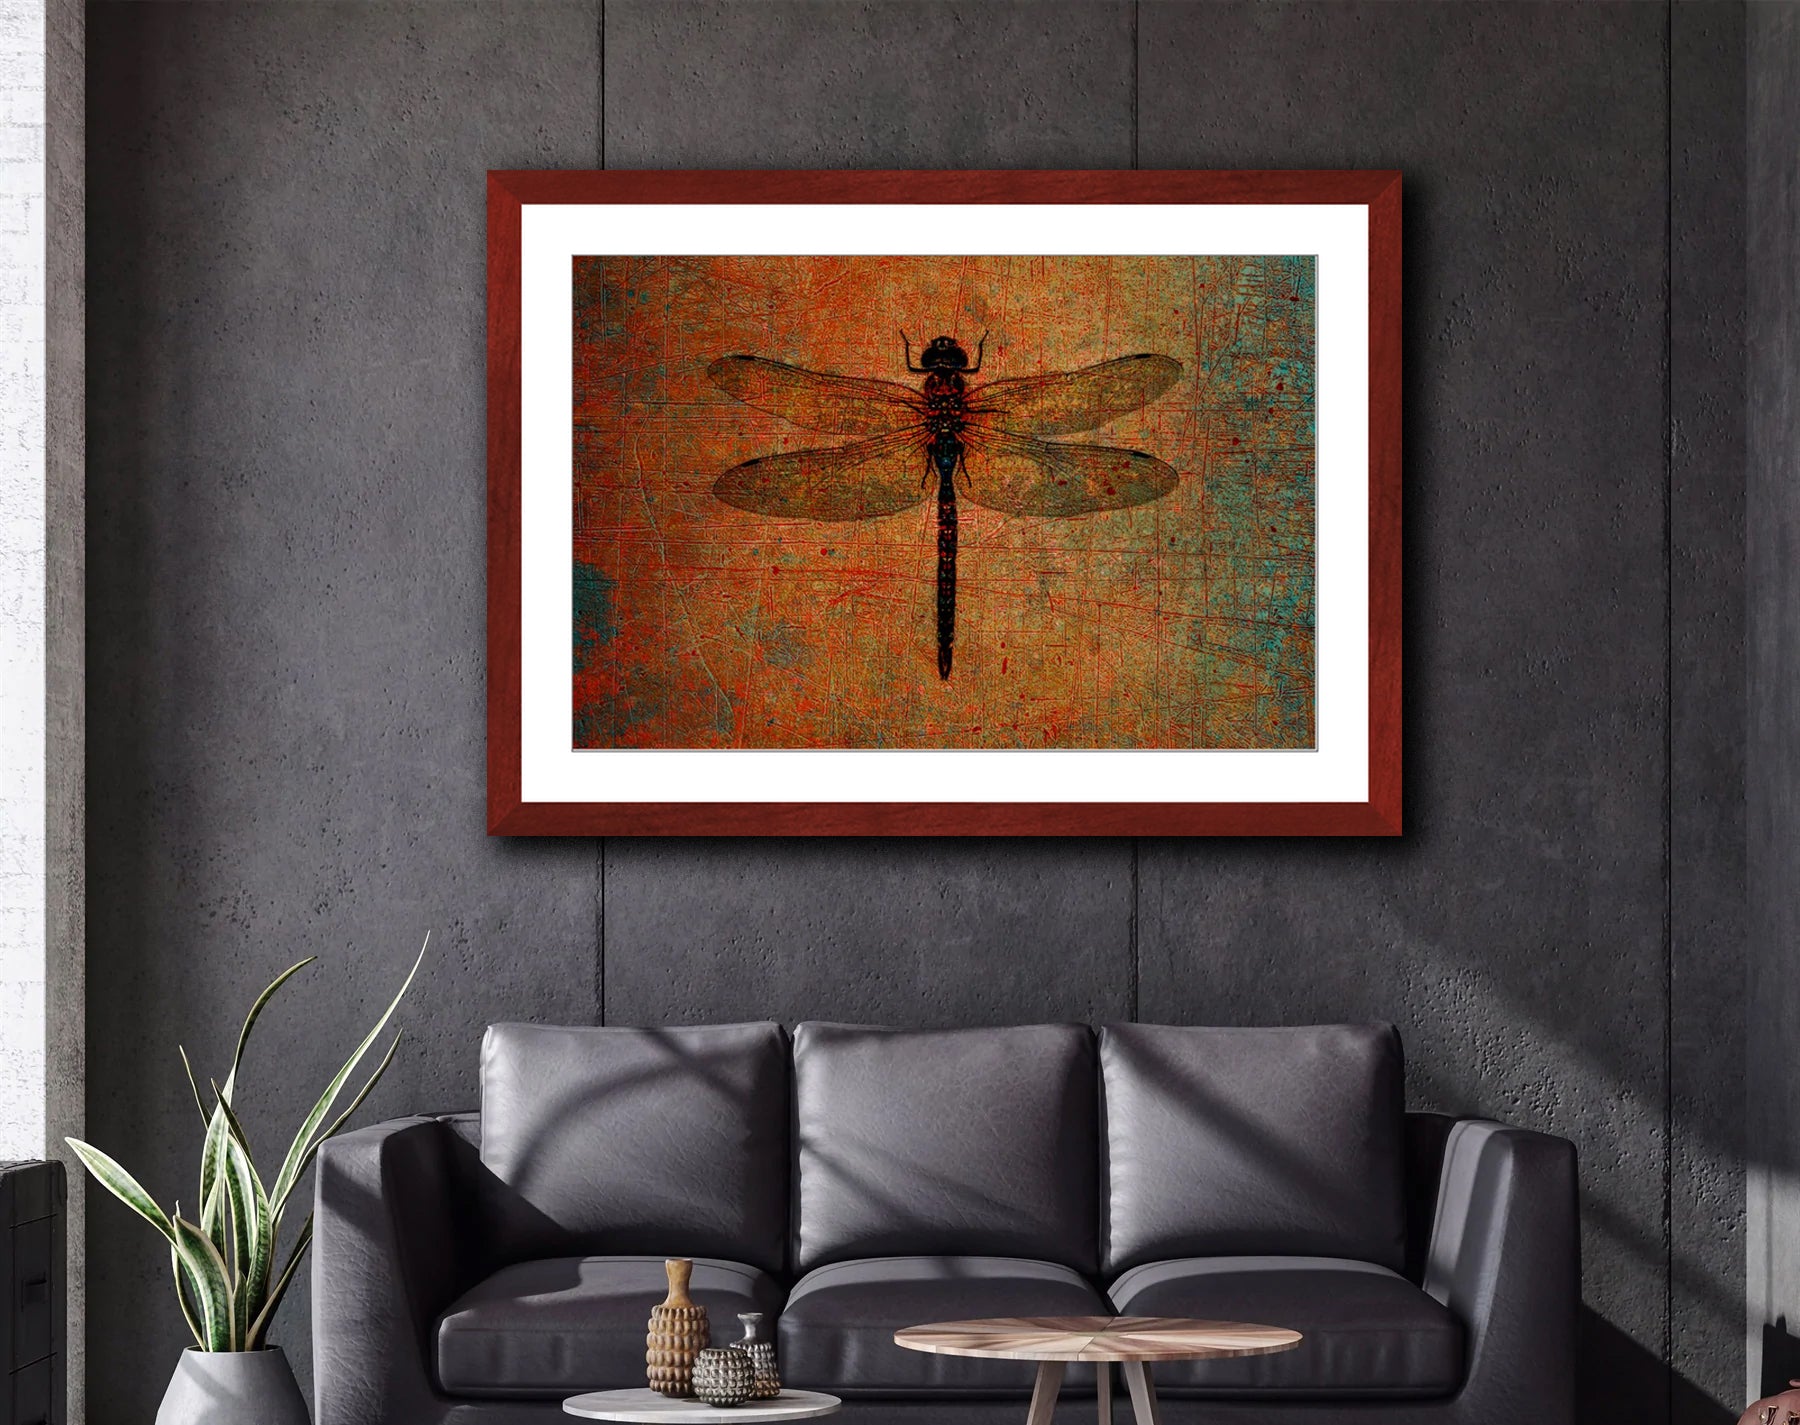 Dragonfly on Distressed Brown Background Framed in a Rectangle Cherry Color Wood Frame 3 sizes available